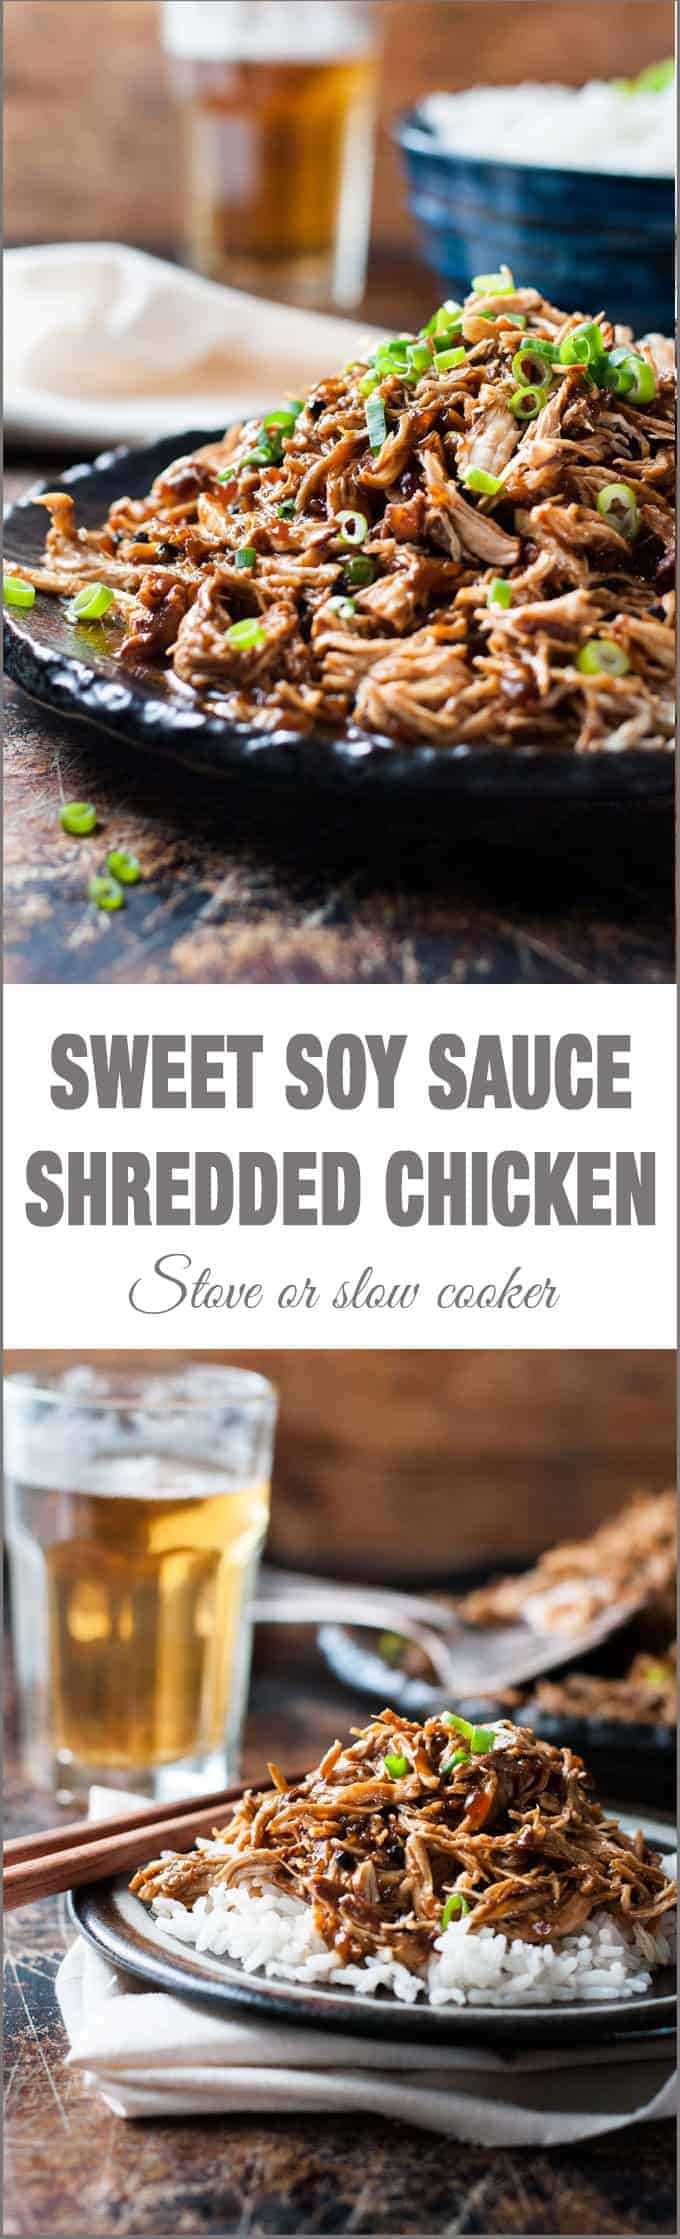 Sweet Soy Shredded Chicken - 5 minutes prep, make this in the slow cooker, stove or even a pressure cooker! Tossed in an Asian style sticky sauce.